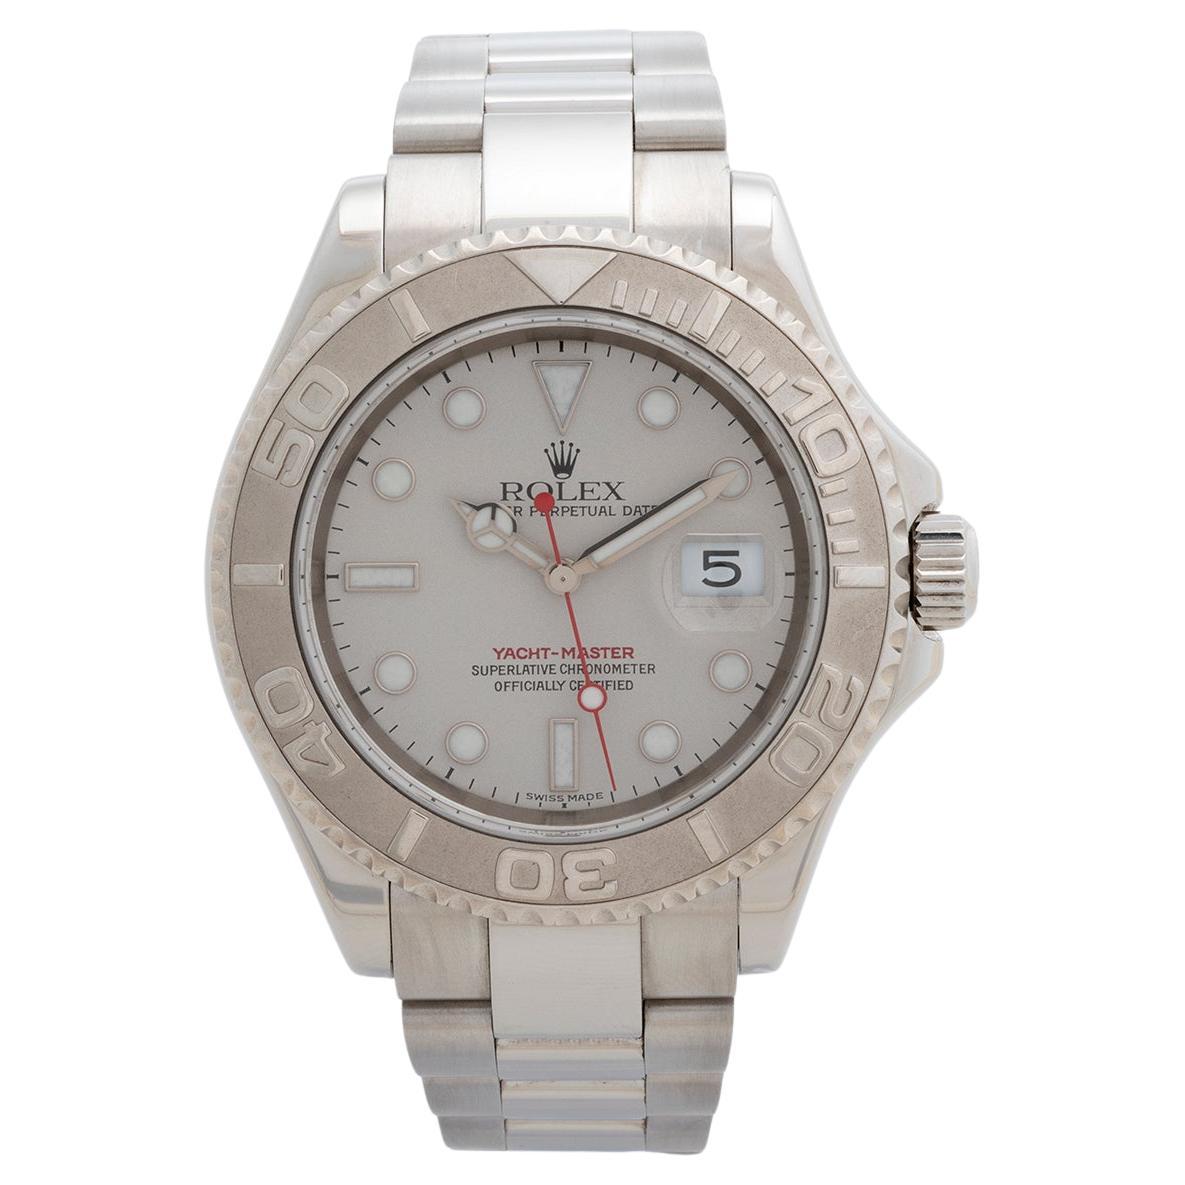 Our Rolex Yacht master reference 16622 features a 40mm stainless steel case, platinum bezel, platinum dust dial and stainless steel bracelet with flip lock clasp. This discontinued reference was the original Yachtmaster, and this example is